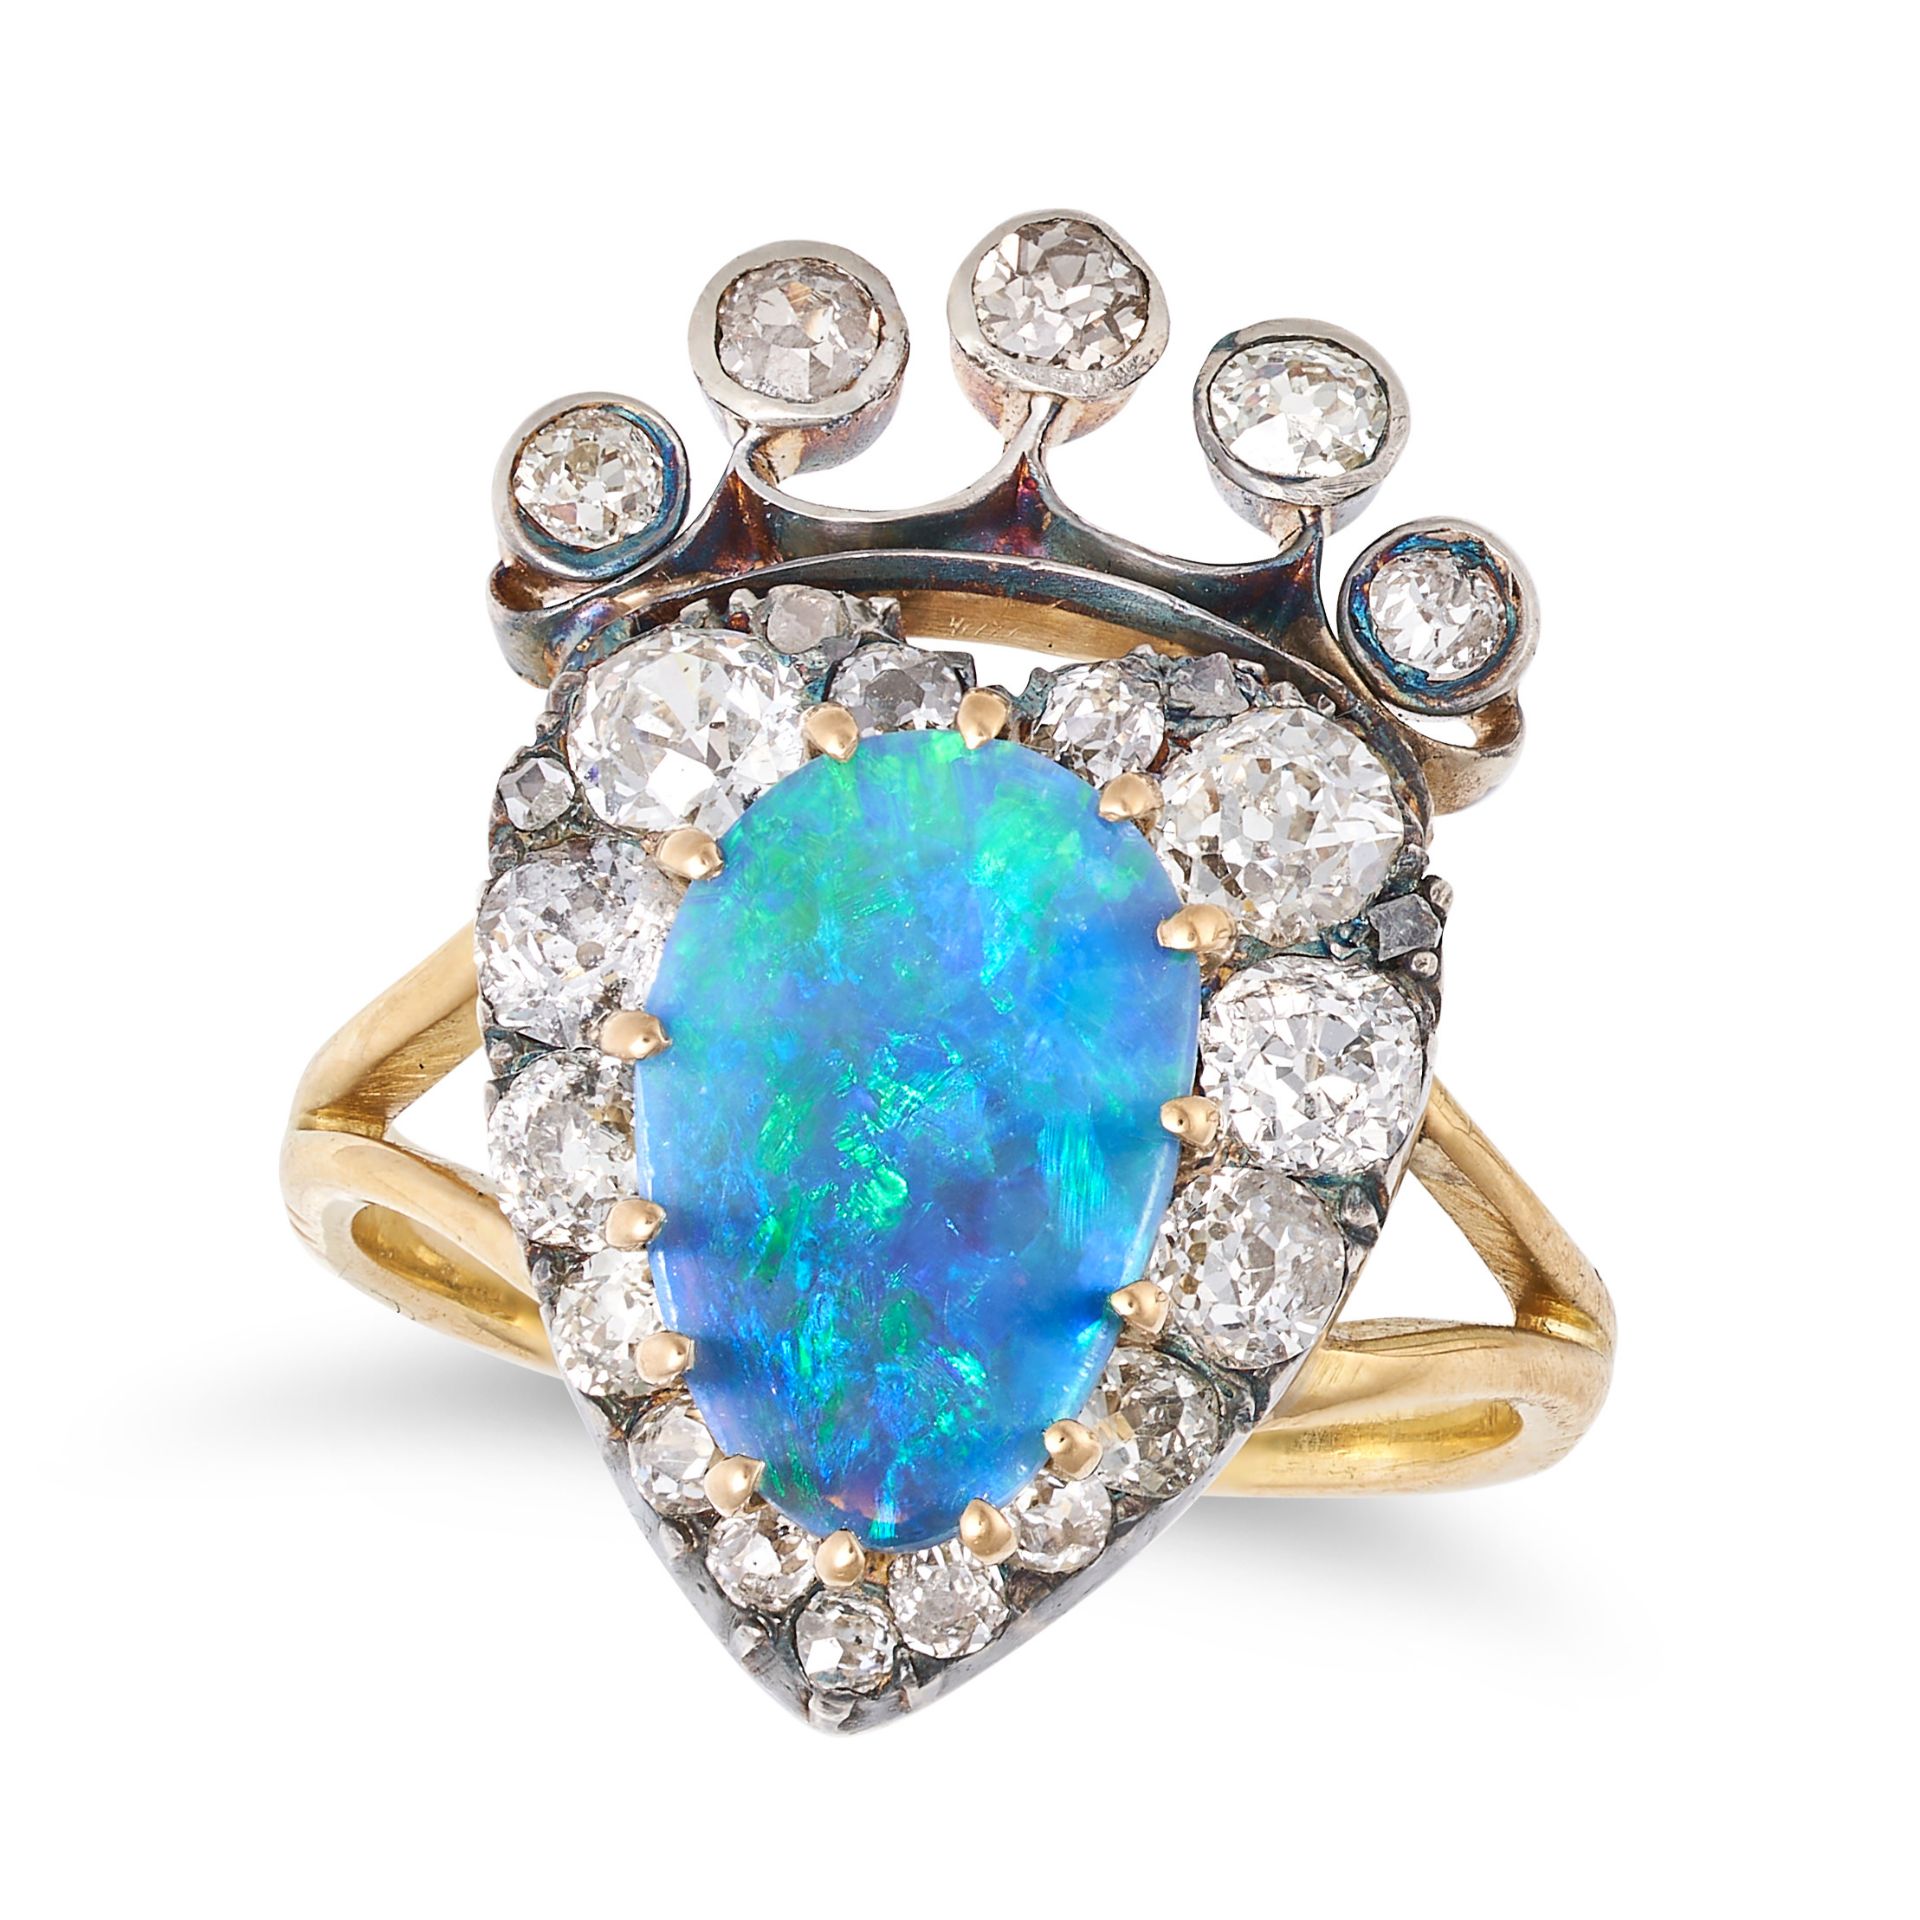 A FINE OPAL AND DIAMOND SWEETHEART RING in yellow gold and silver, designed to depict a heart sur...